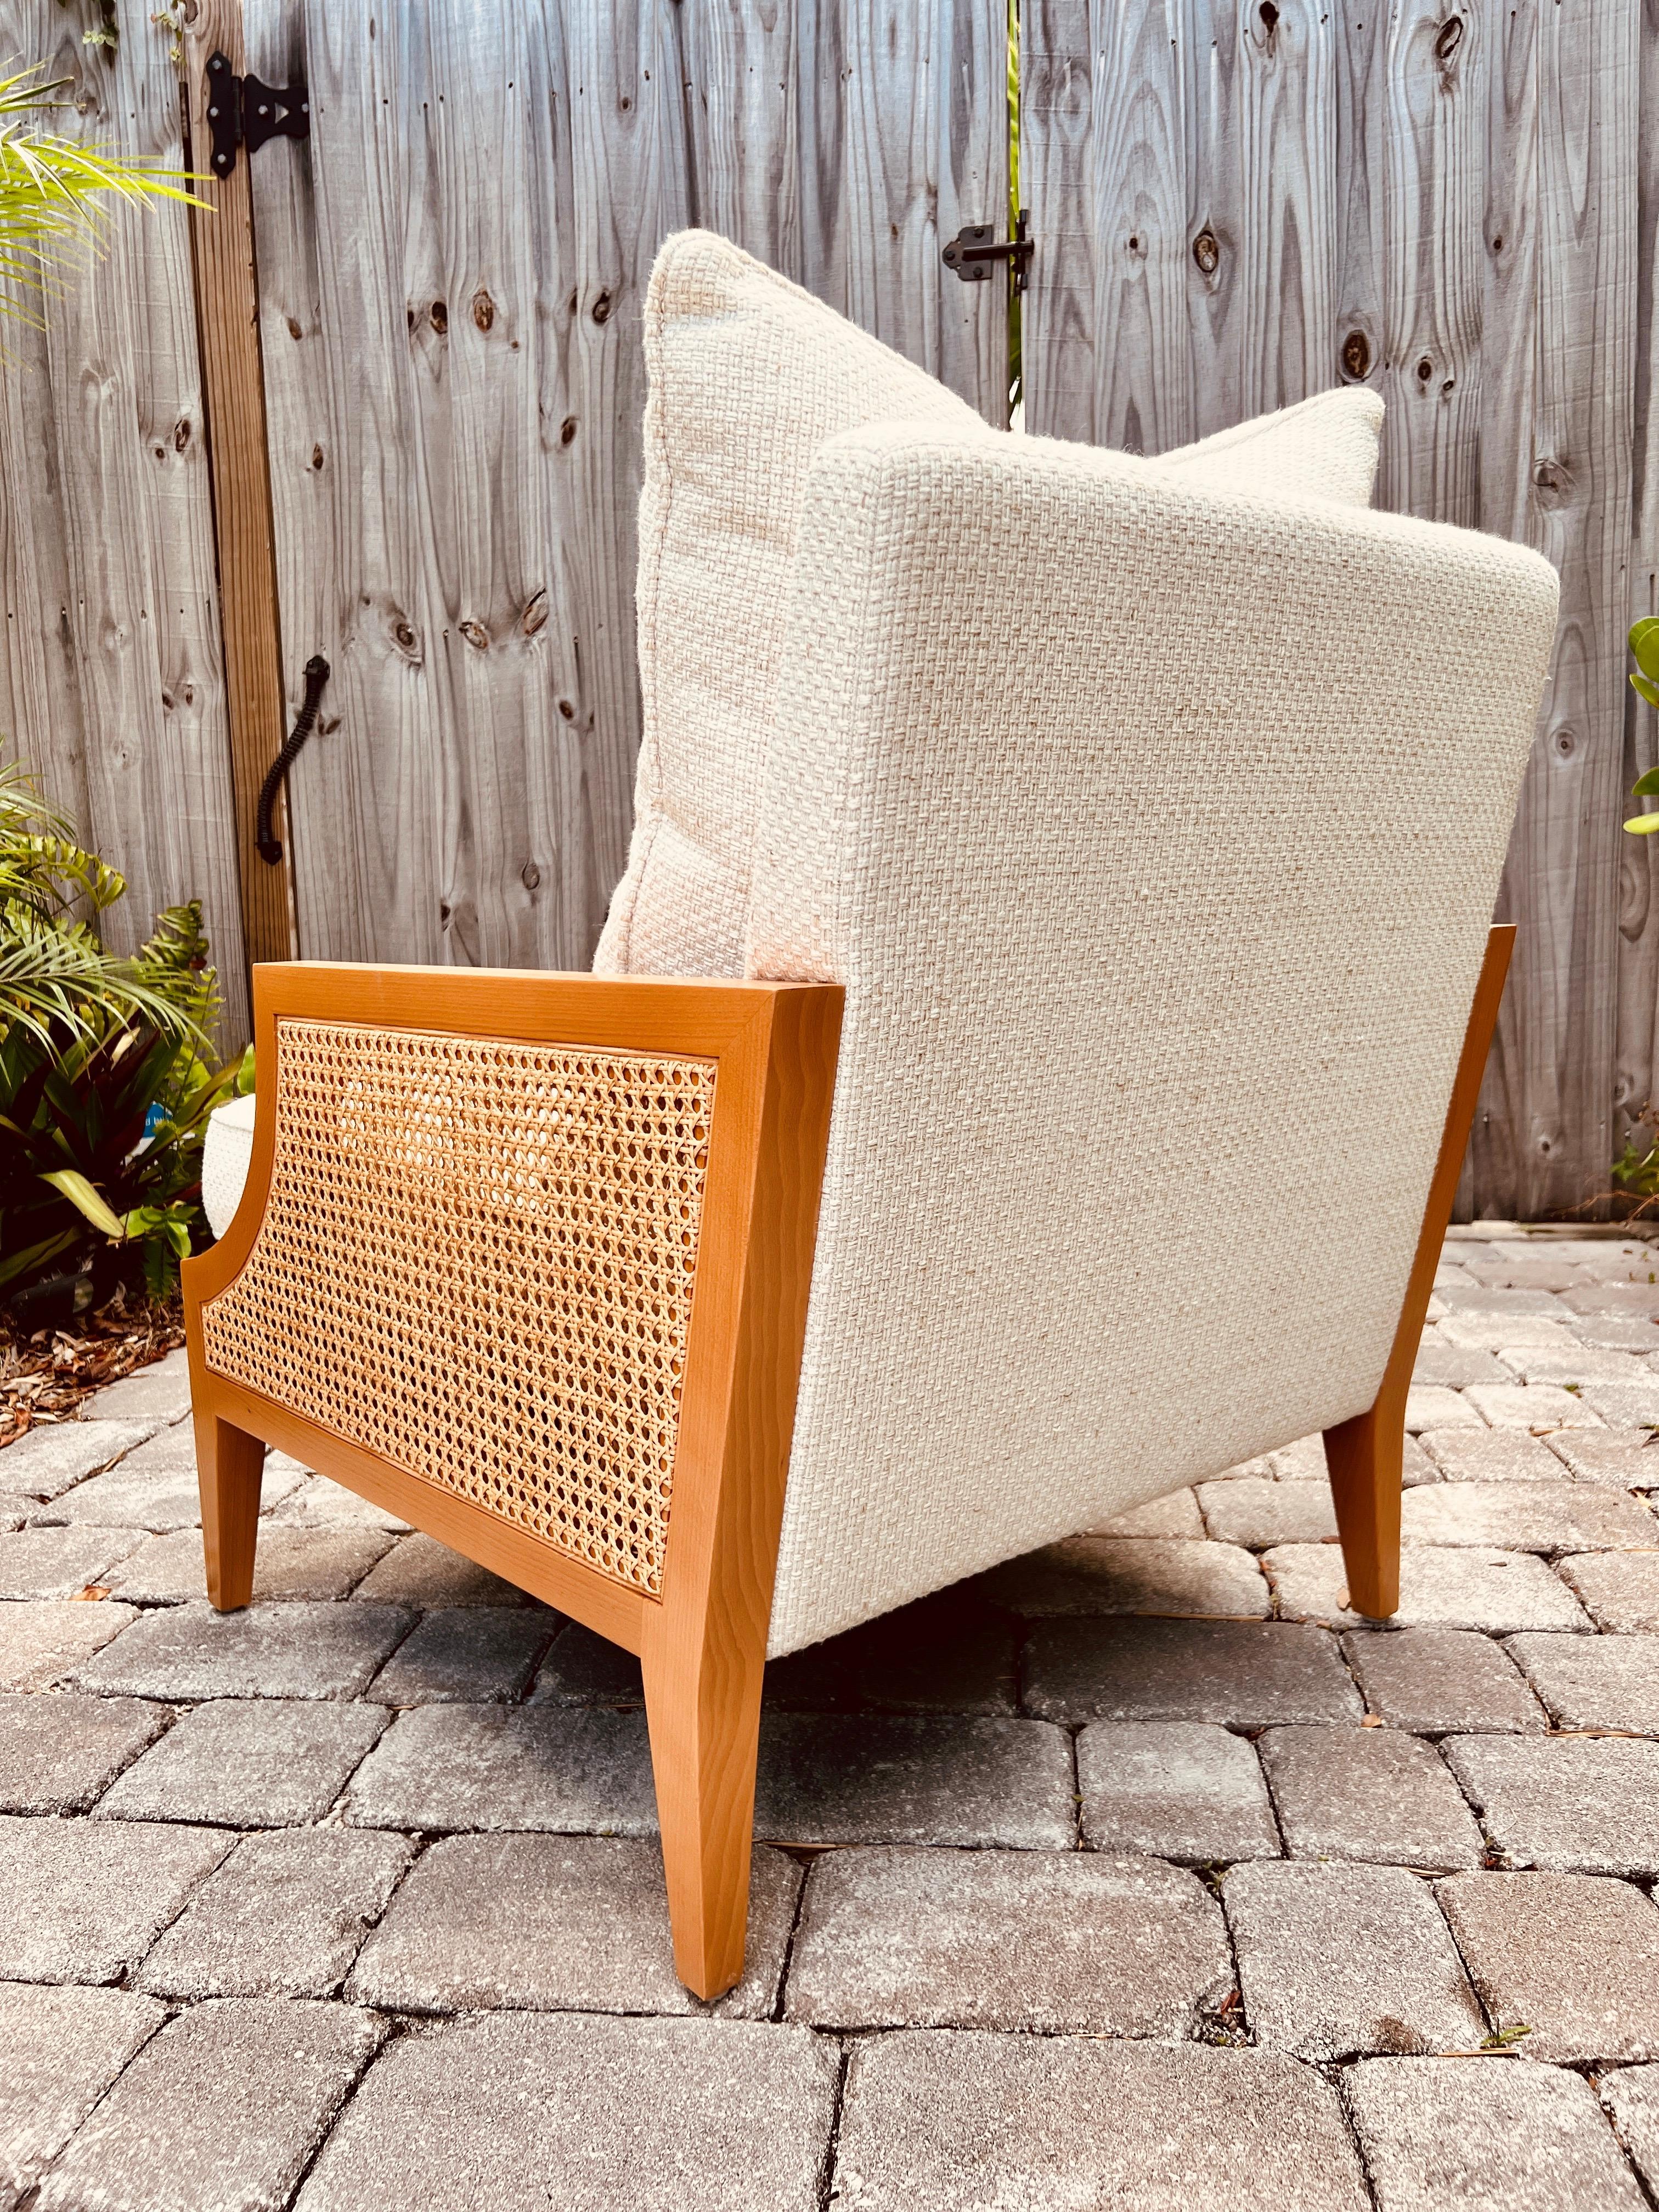 Beechwood and Cane Lounge Chair in Ivory Basketweave by Pierre Frey In Good Condition For Sale In Fort Lauderdale, FL